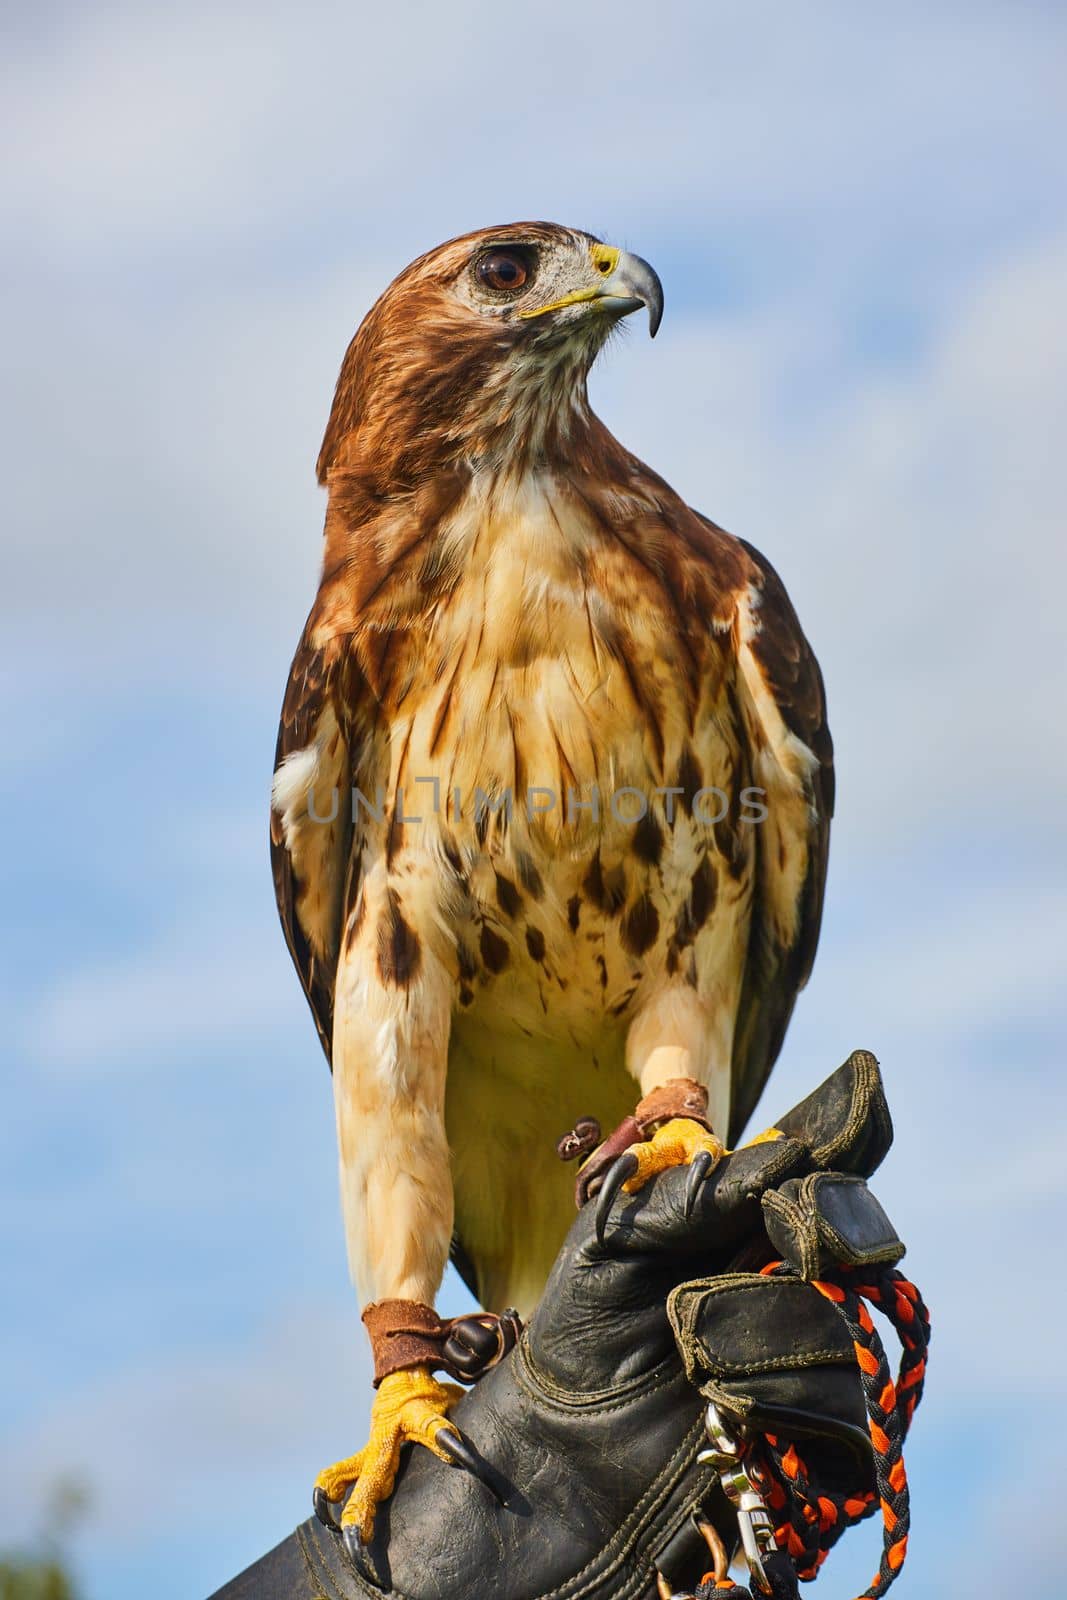 Image of Magnificent Broad-winged Hawk resting on leather glove of trainer